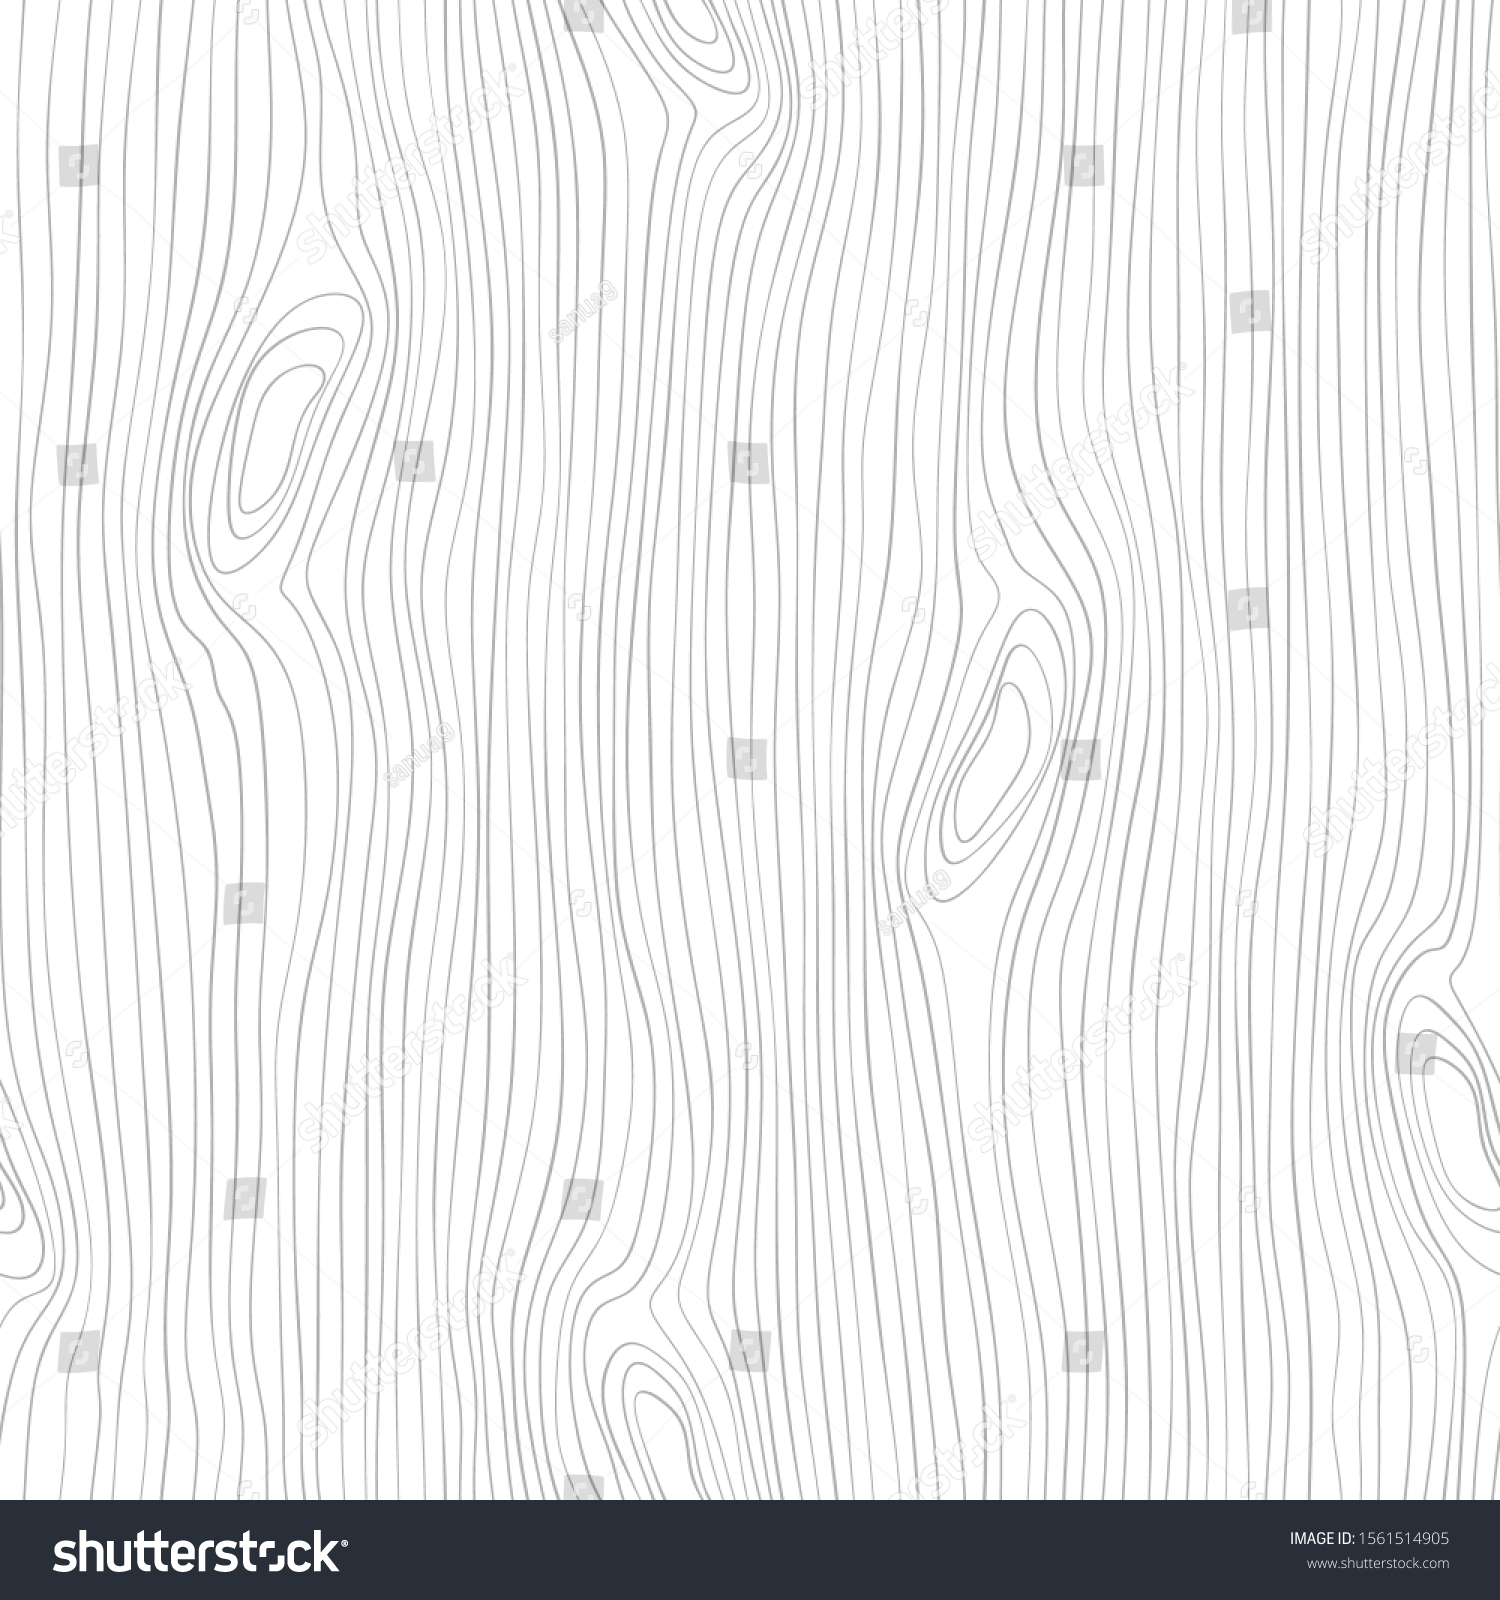 Seamless wooden pattern. Wood grain texture. Dense lines. Abstract background. Vector illustration #1561514905